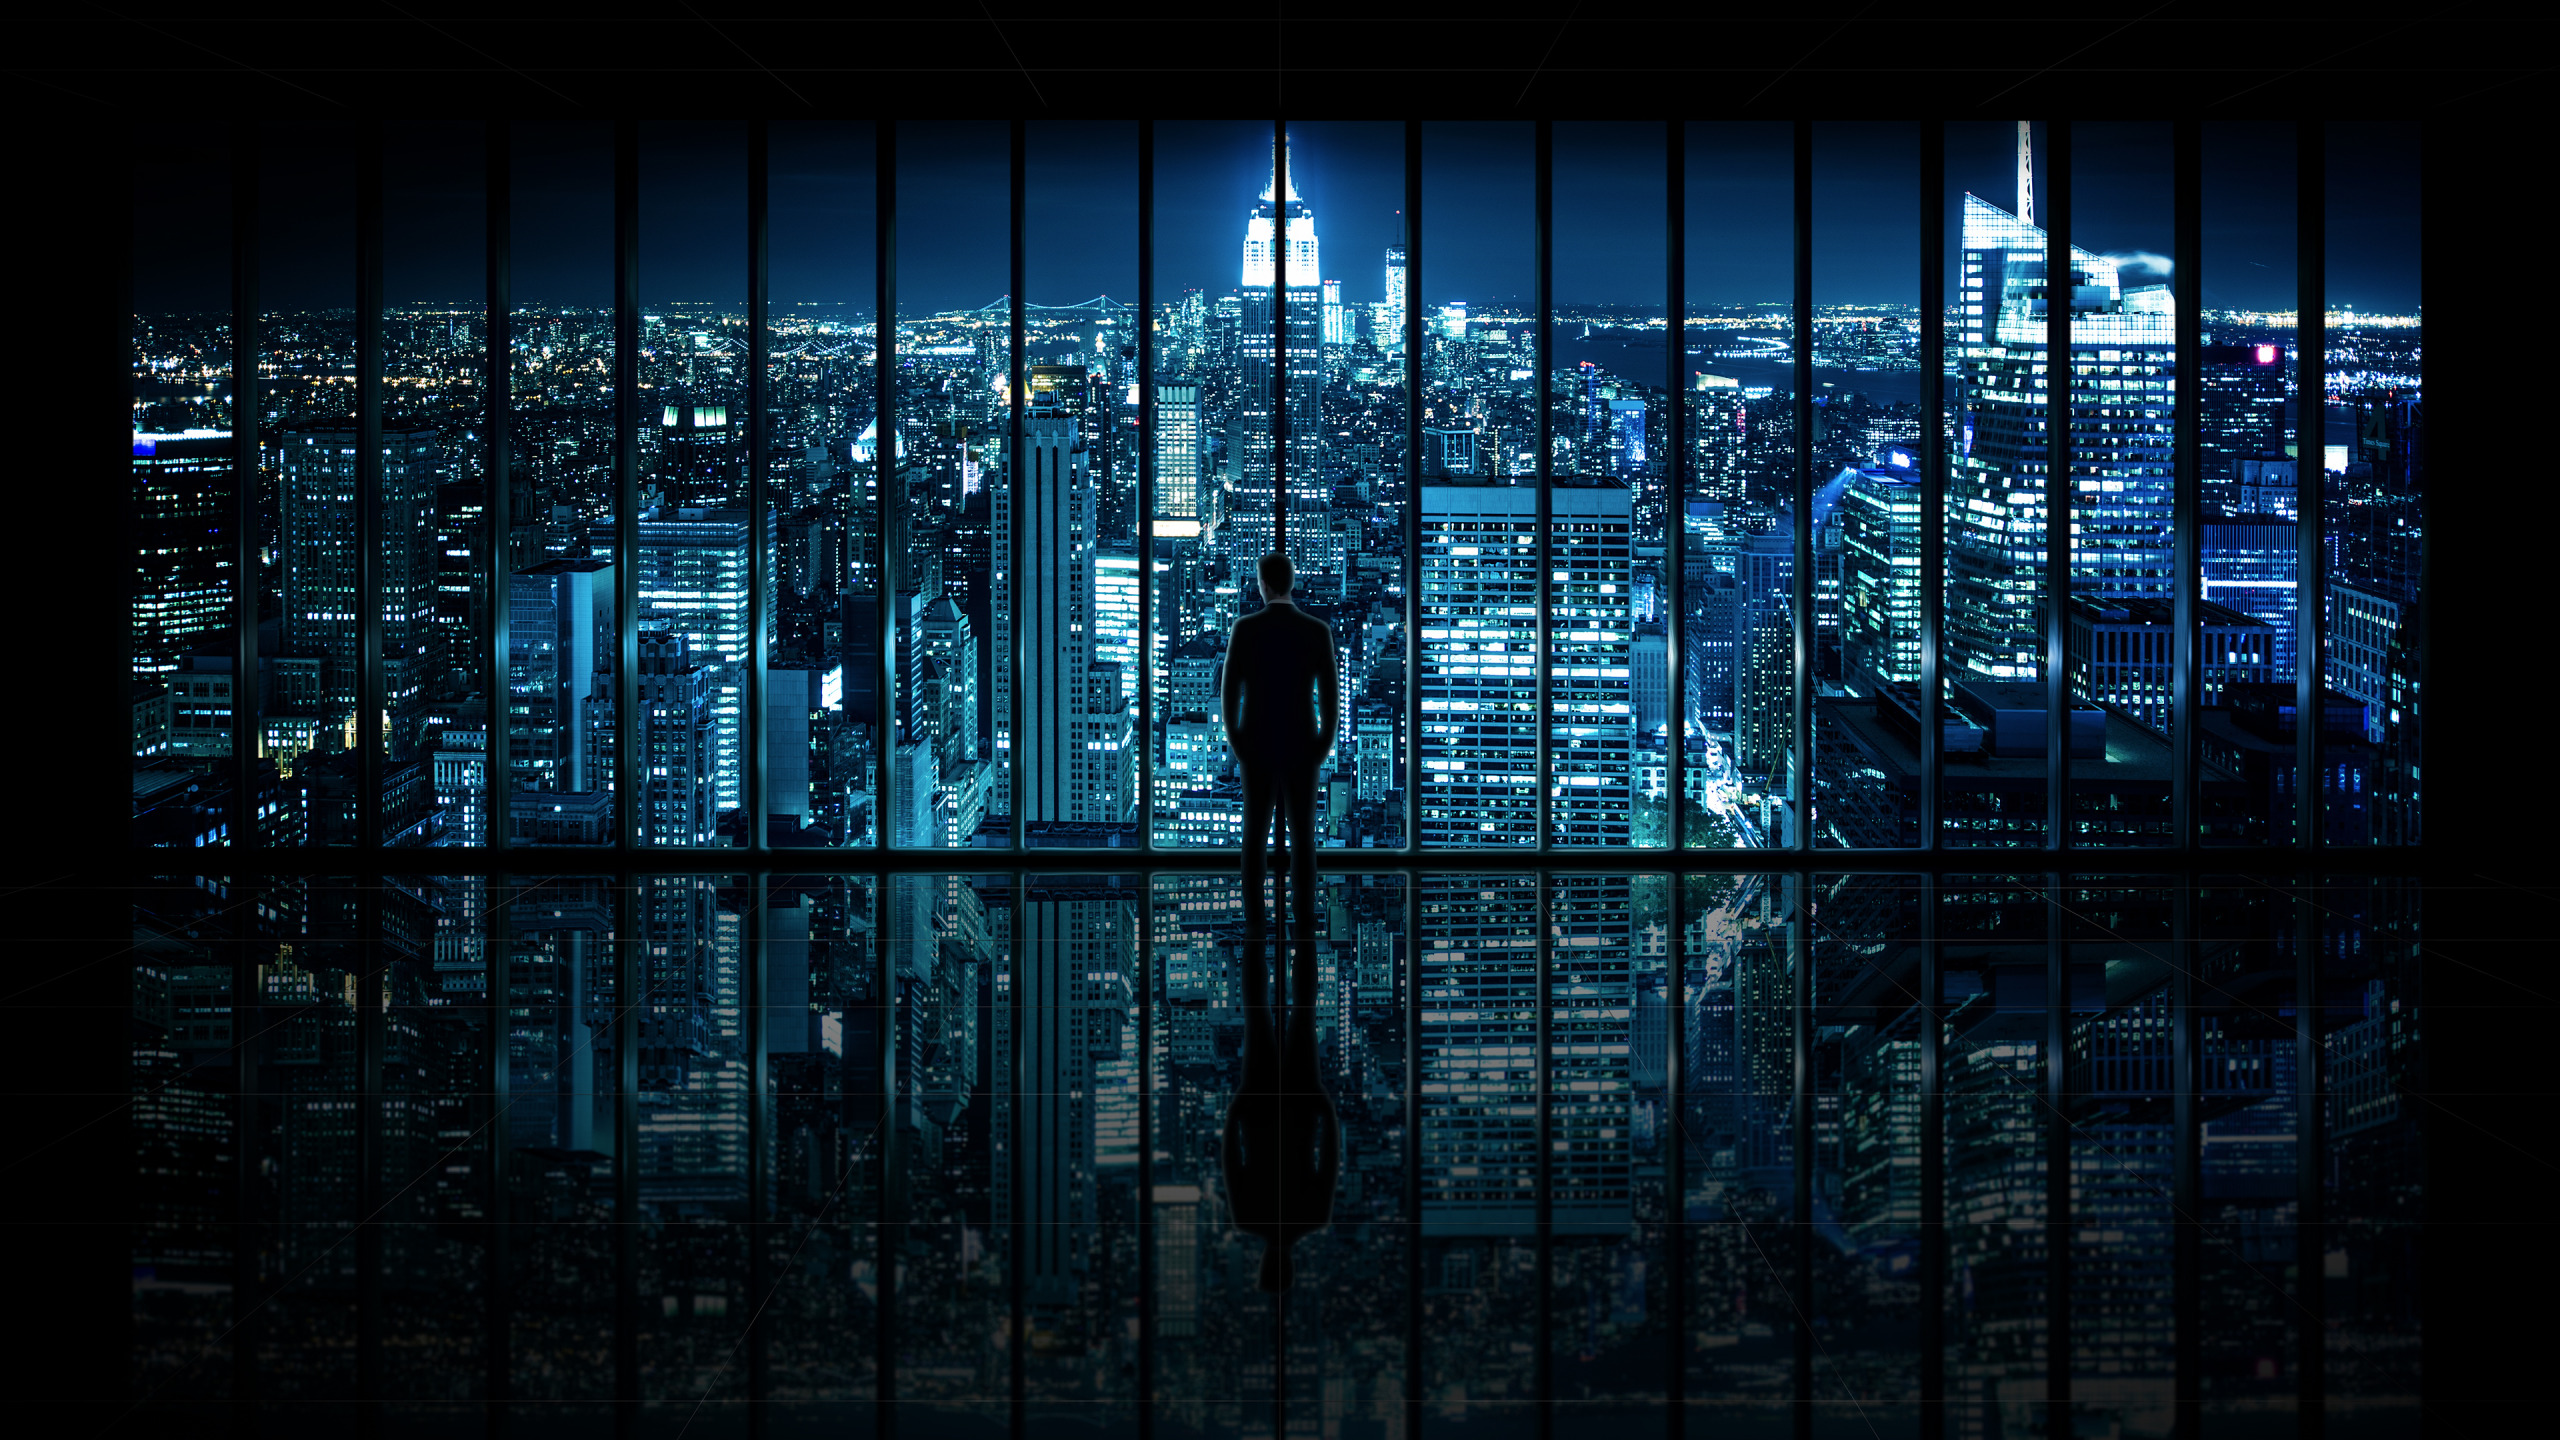 Download wallpaper night, the city, view, window, male, The Dark Knight,  New York City, Window to Gotham City, section city in resolution 2560x1440